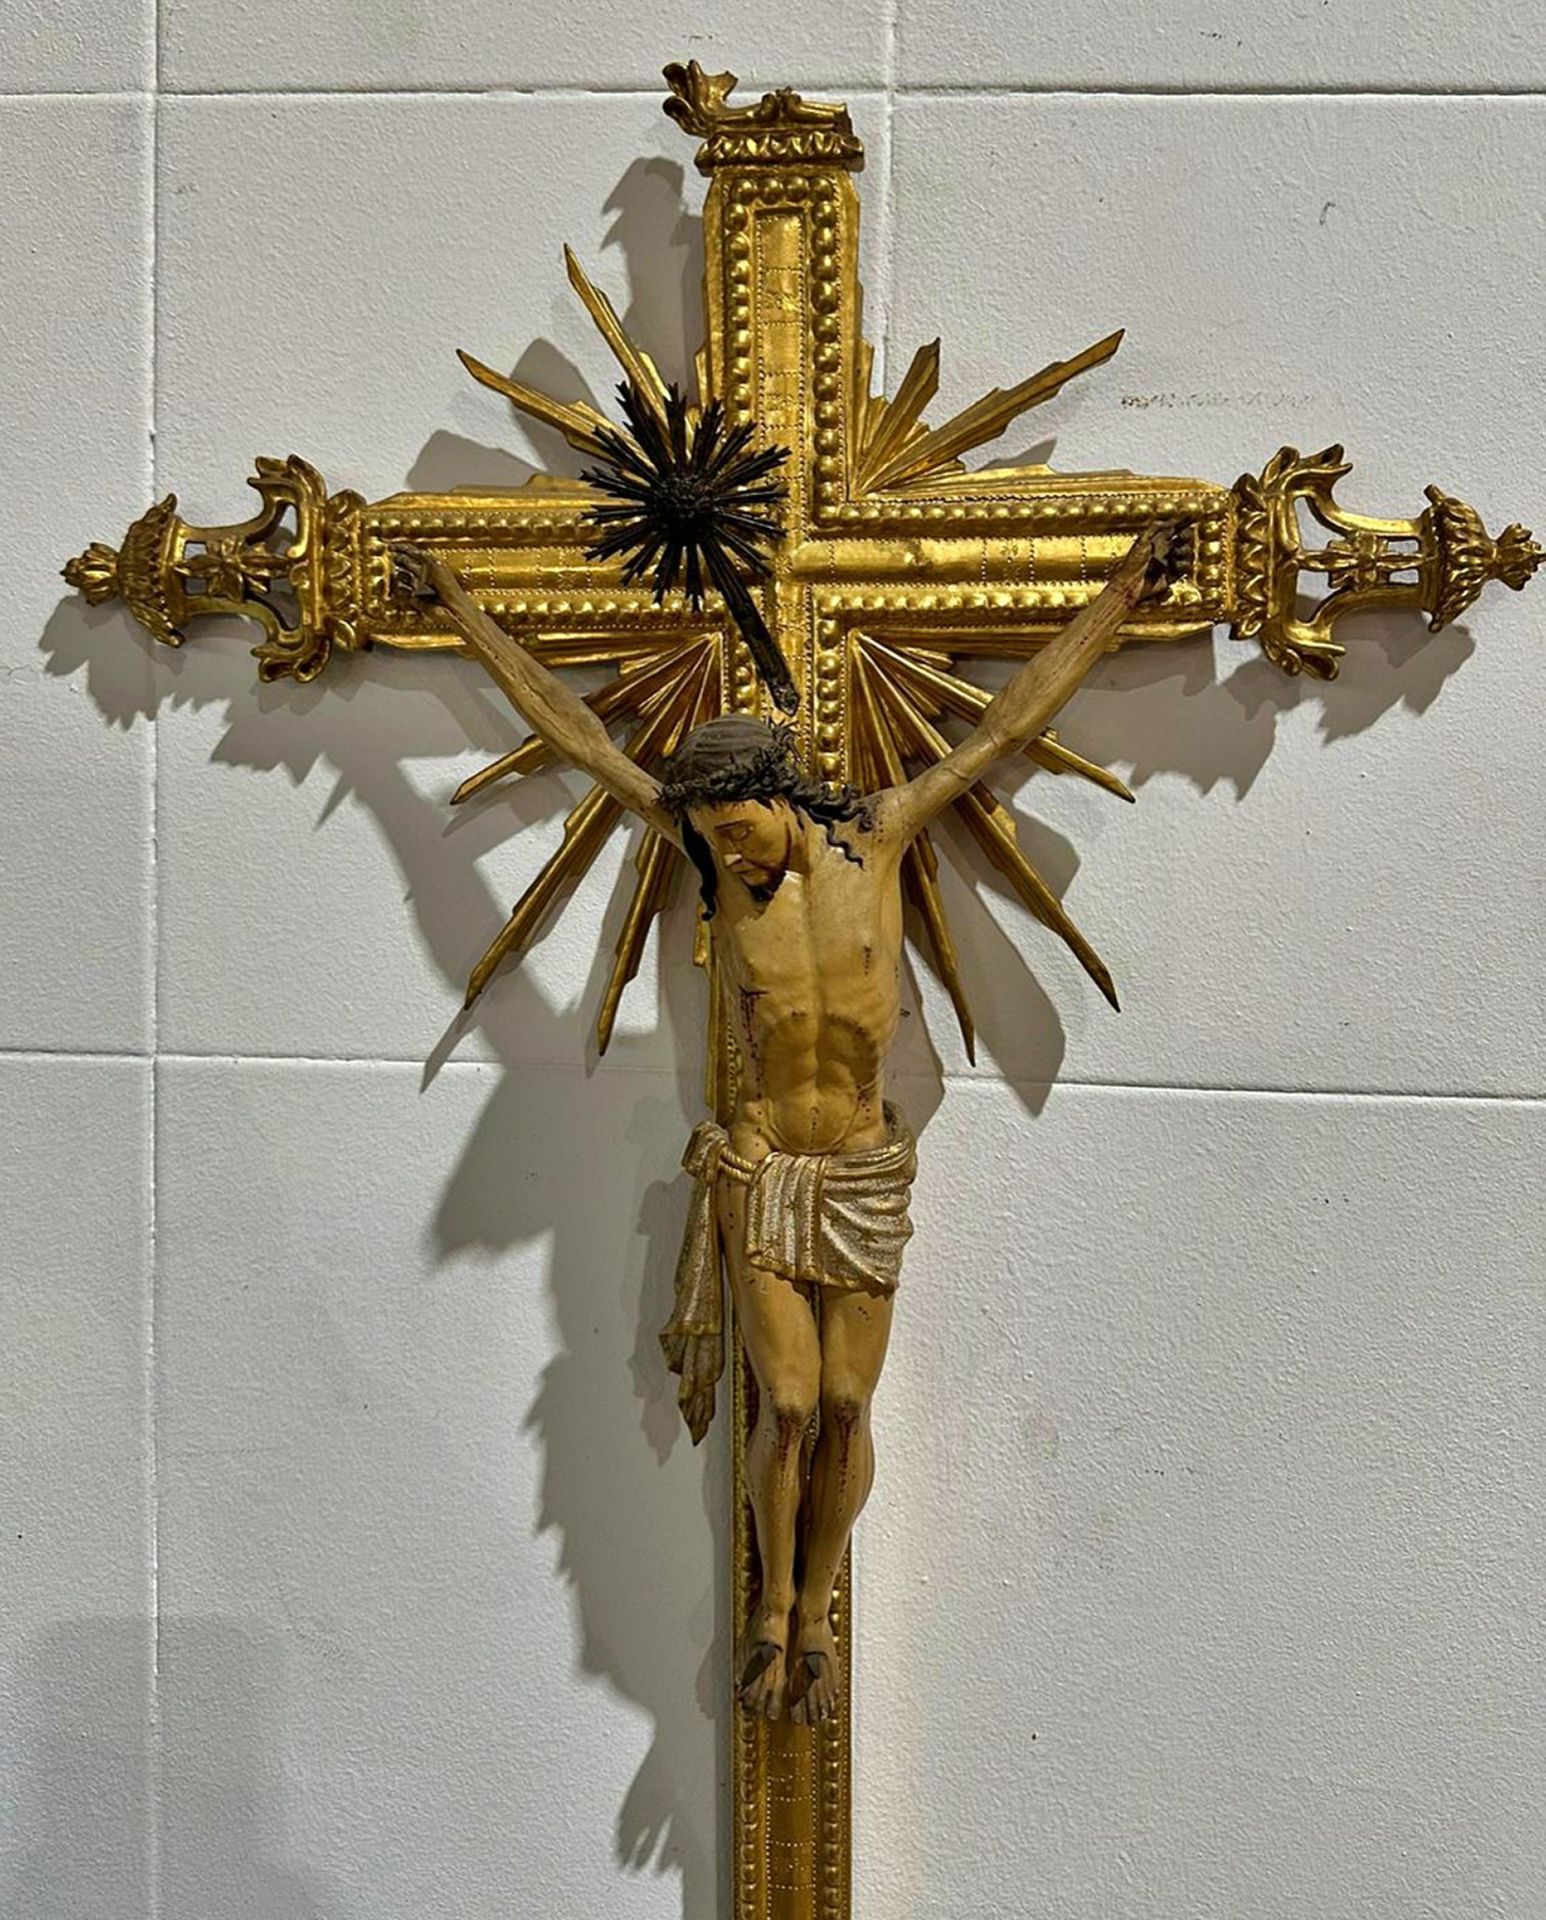 Rare New Spanish colonial Christ from the 17th - 18th century, Mexican colonial school - Image 2 of 3